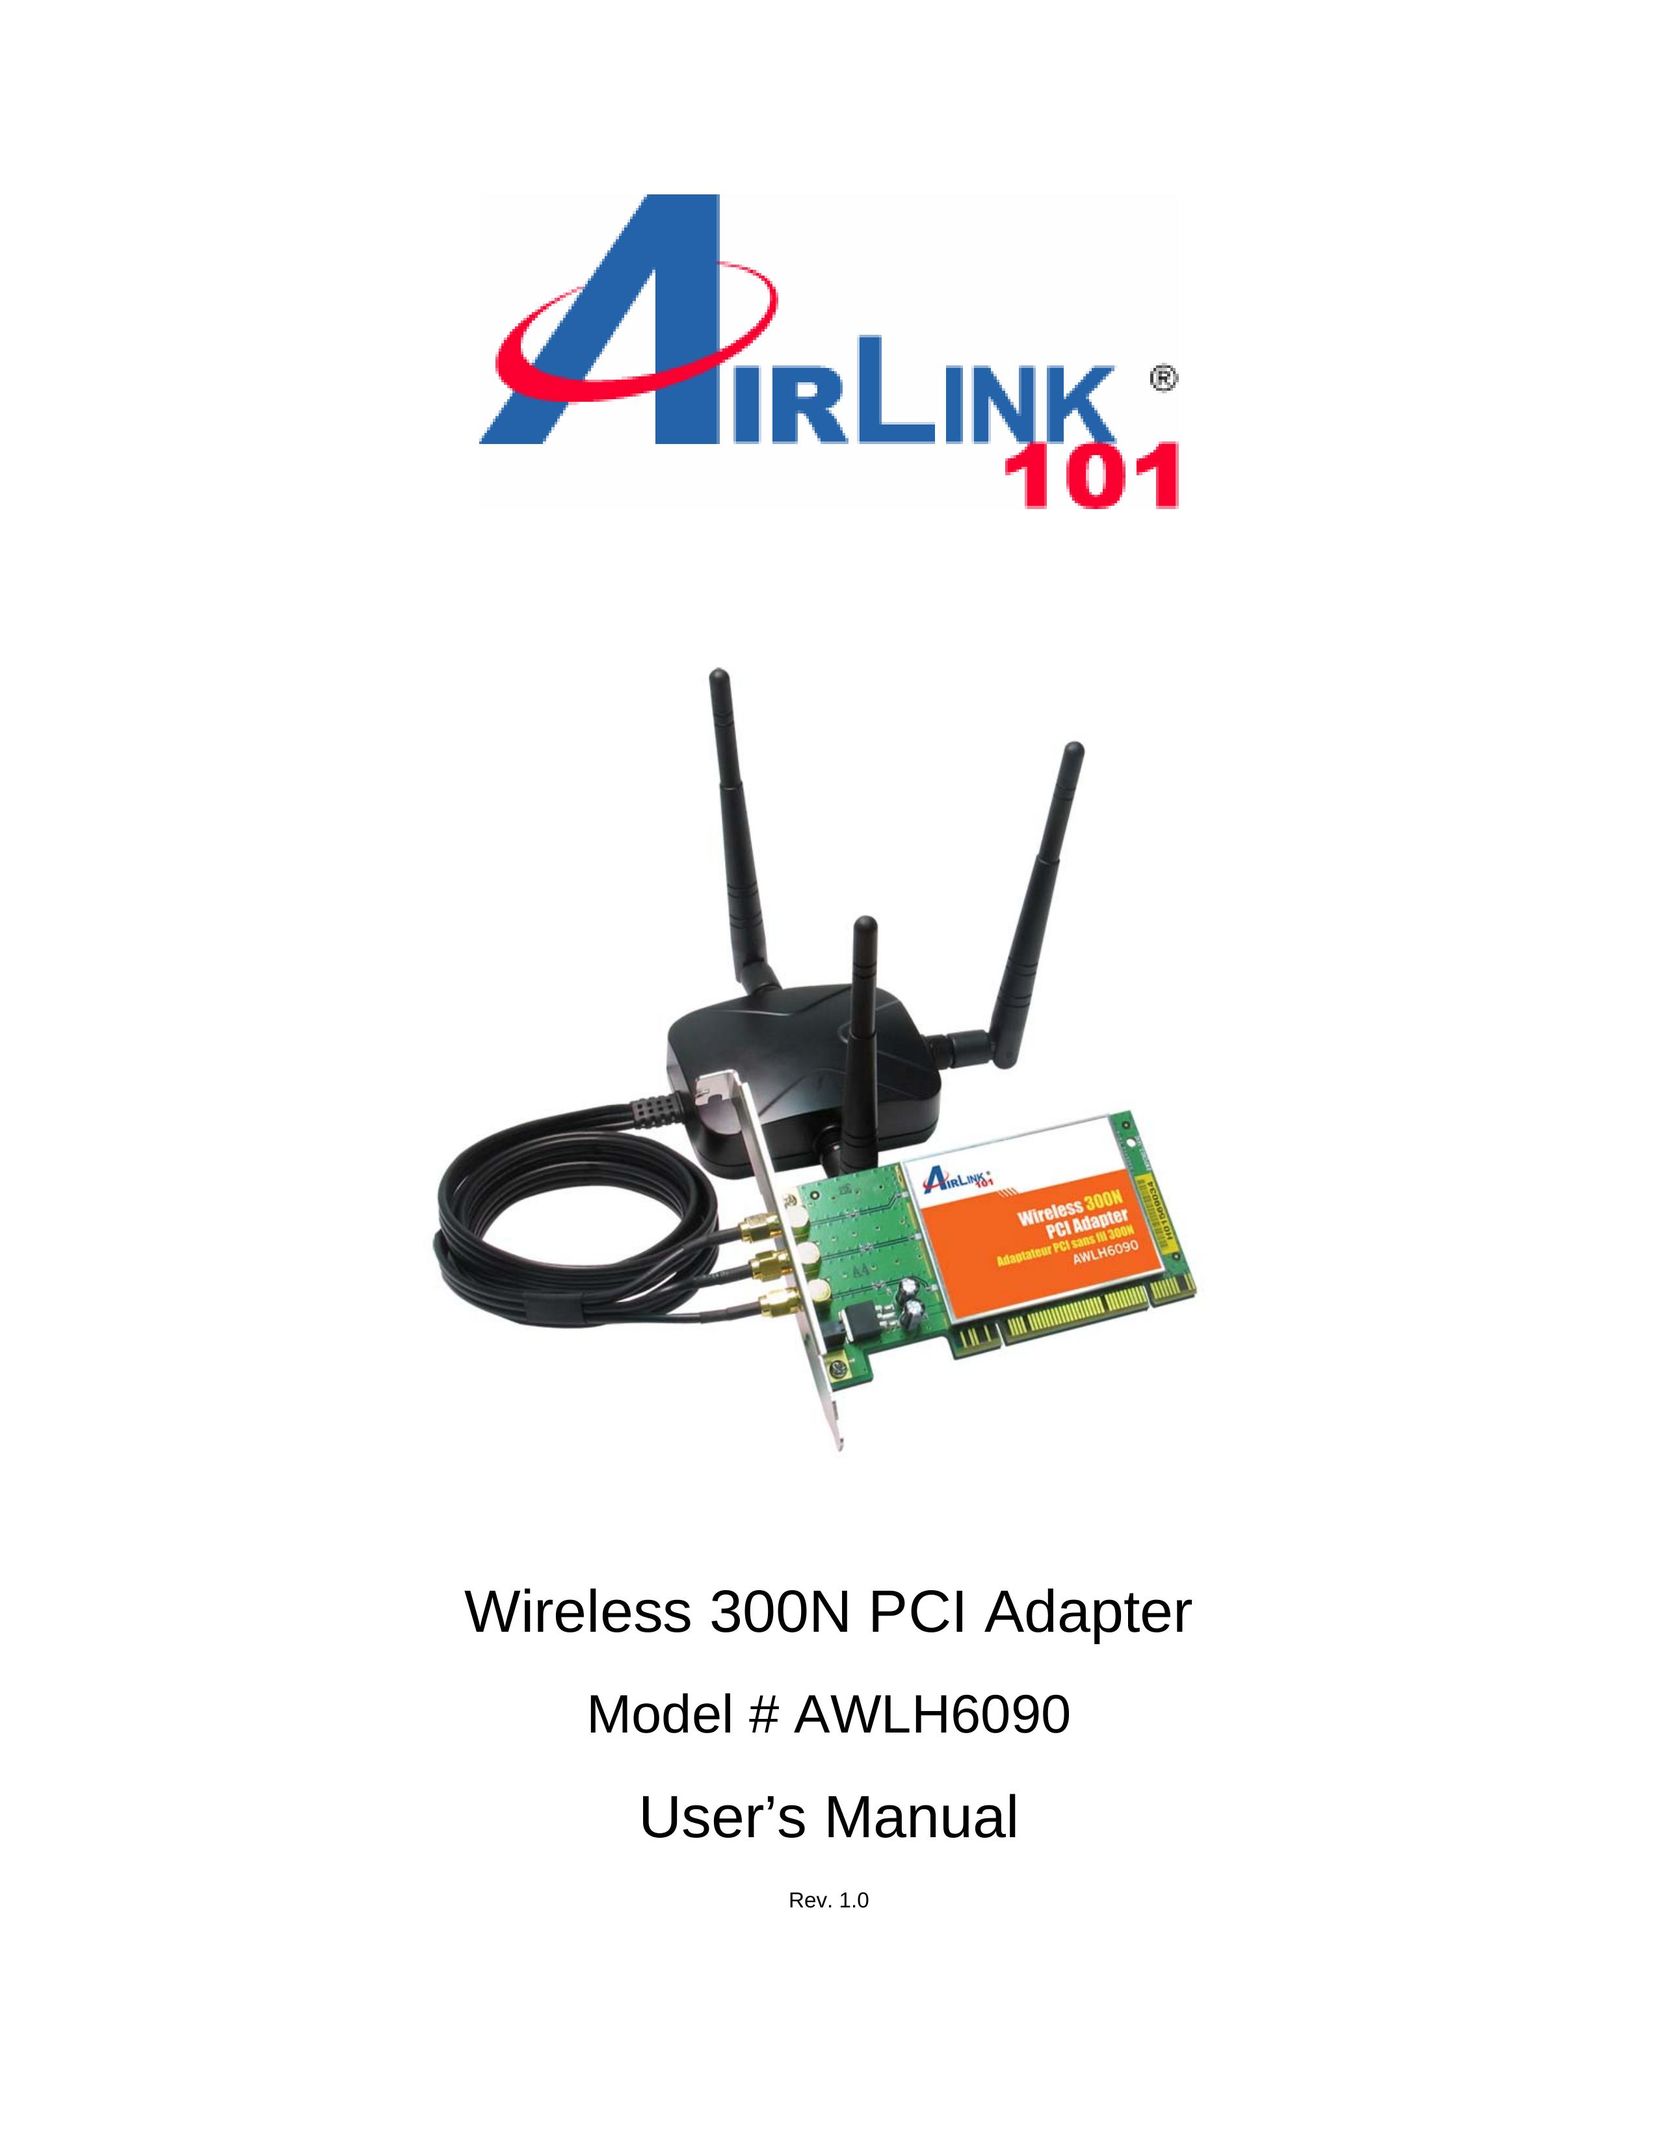 Airlink101 AWLH6090 Network Card User Manual